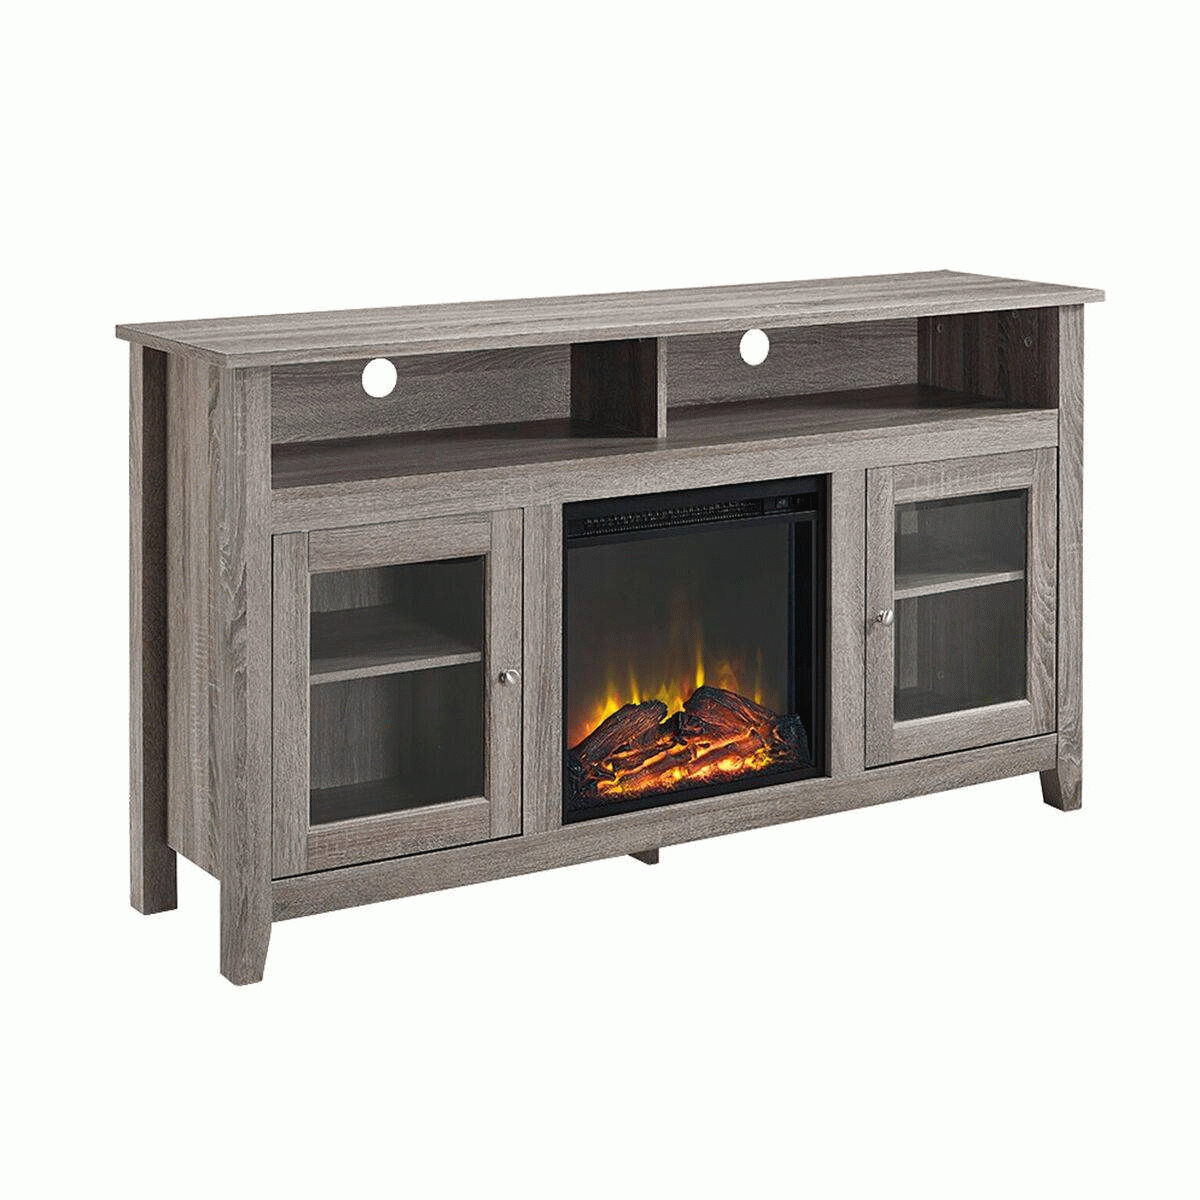 58" Wood Highboy Fireplace Tv Stand – Driftwood – Walker Edison W58fp18hbag Throughout Wood Highboy Fireplace Tv Stands (View 4 of 15)